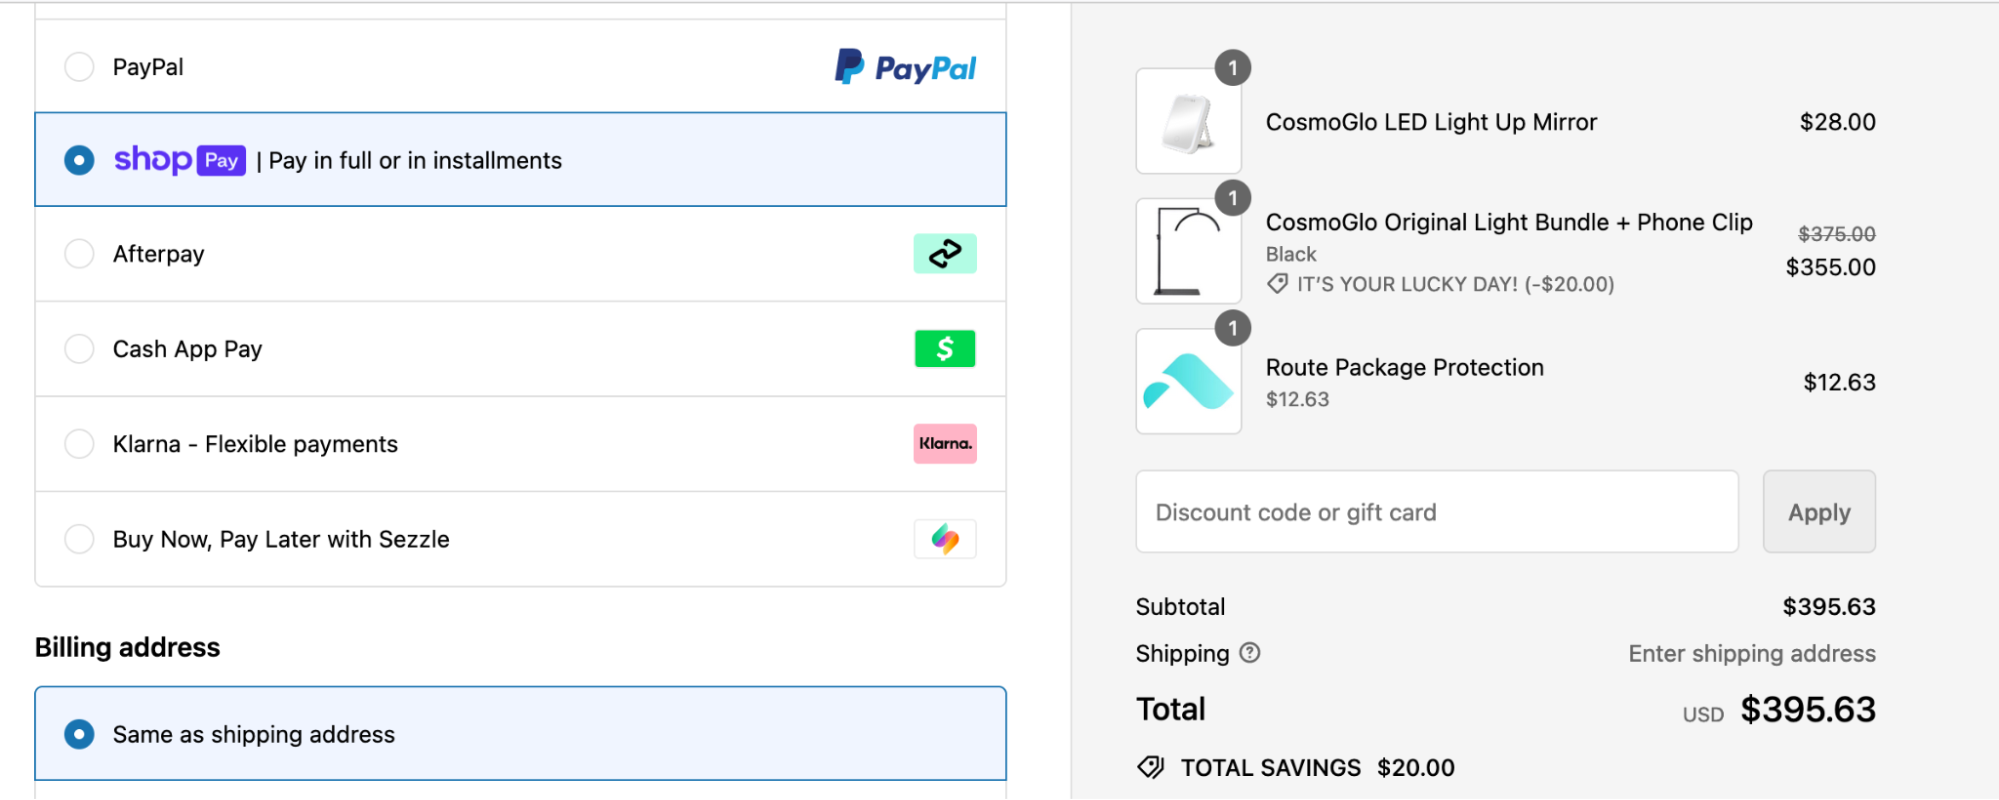 Image of CosmoGlo payment options at checkout.